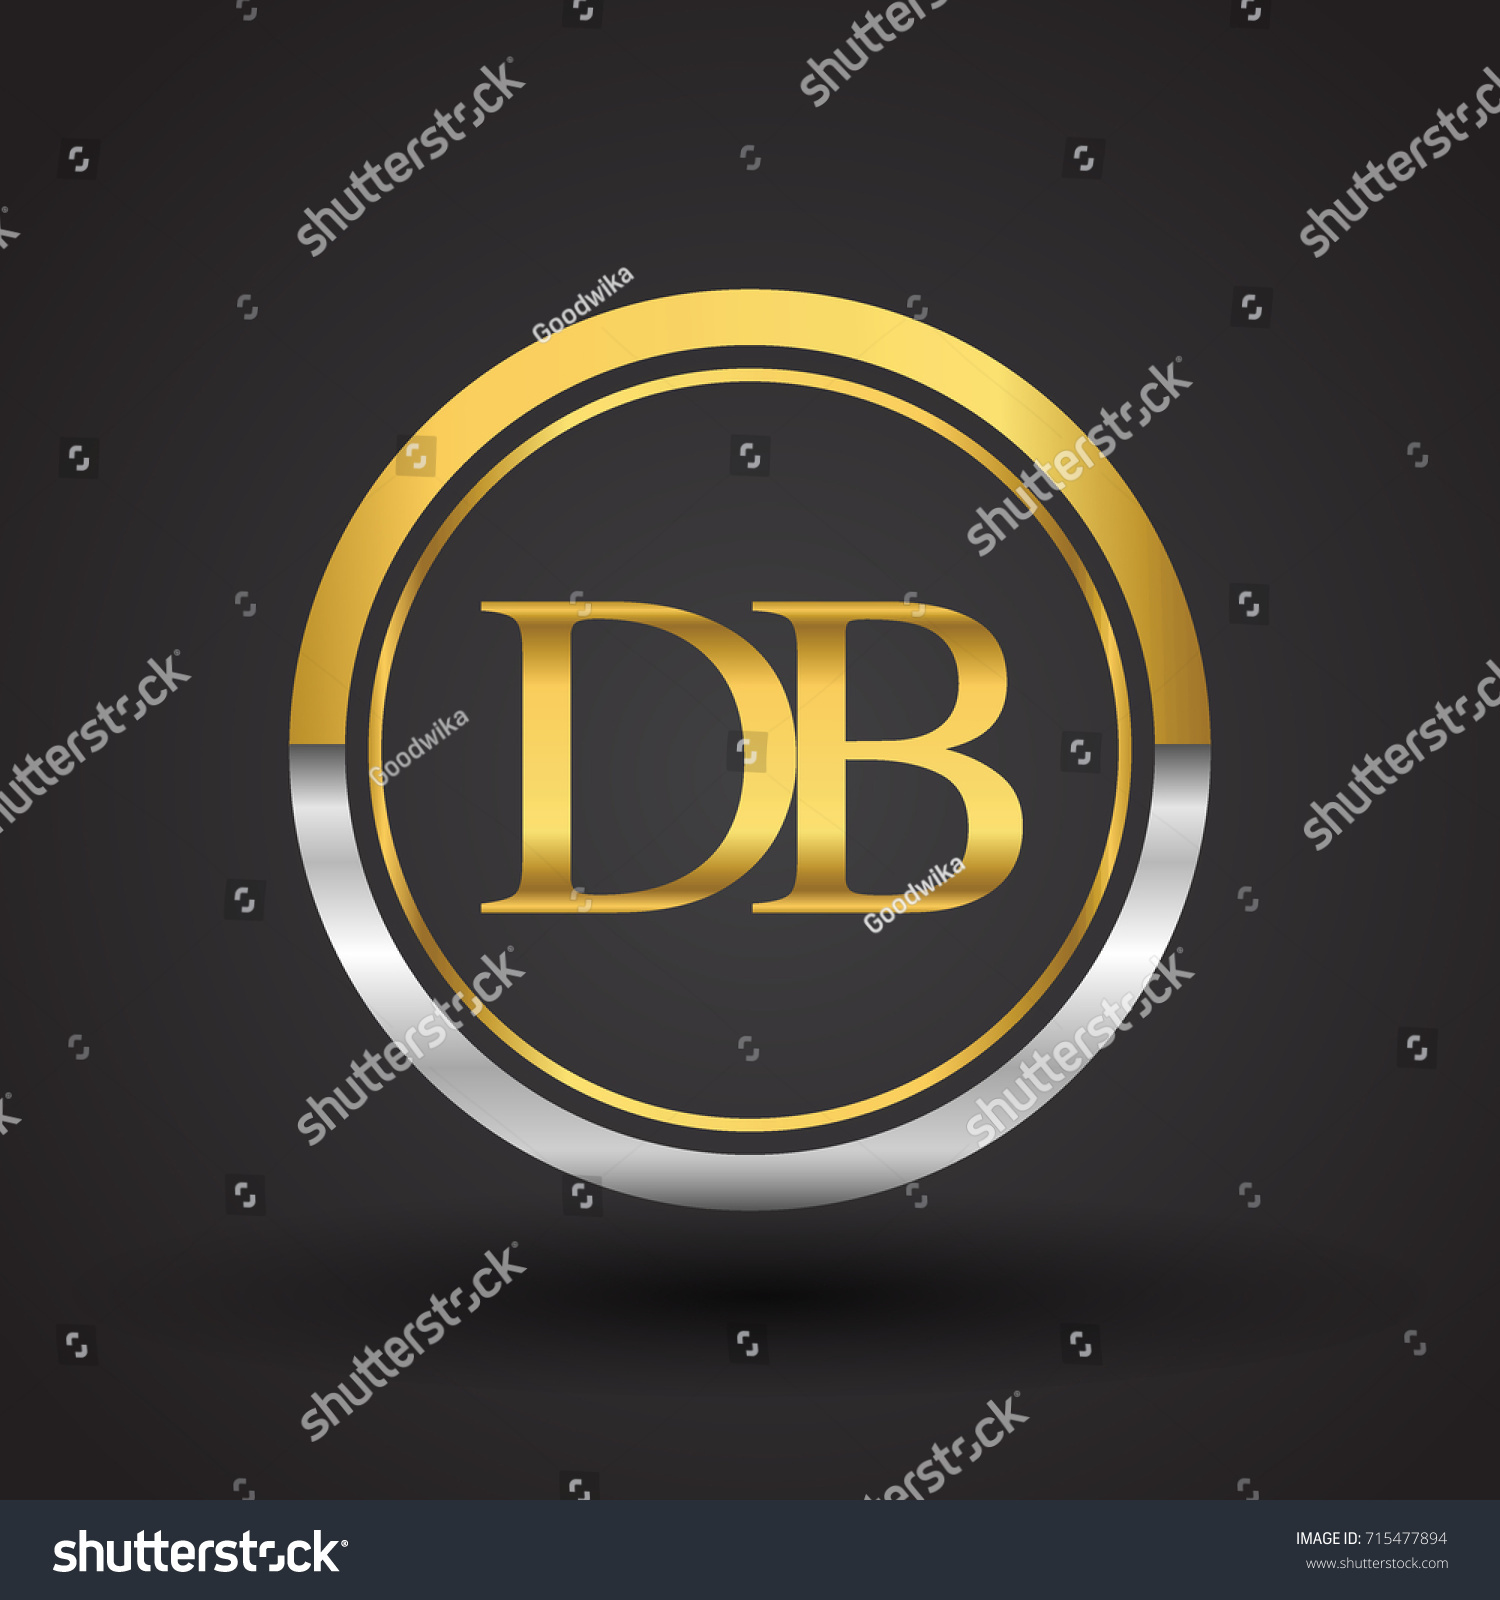 DB Letter logo in a circle, gold and silver - Royalty Free Stock Vector ...